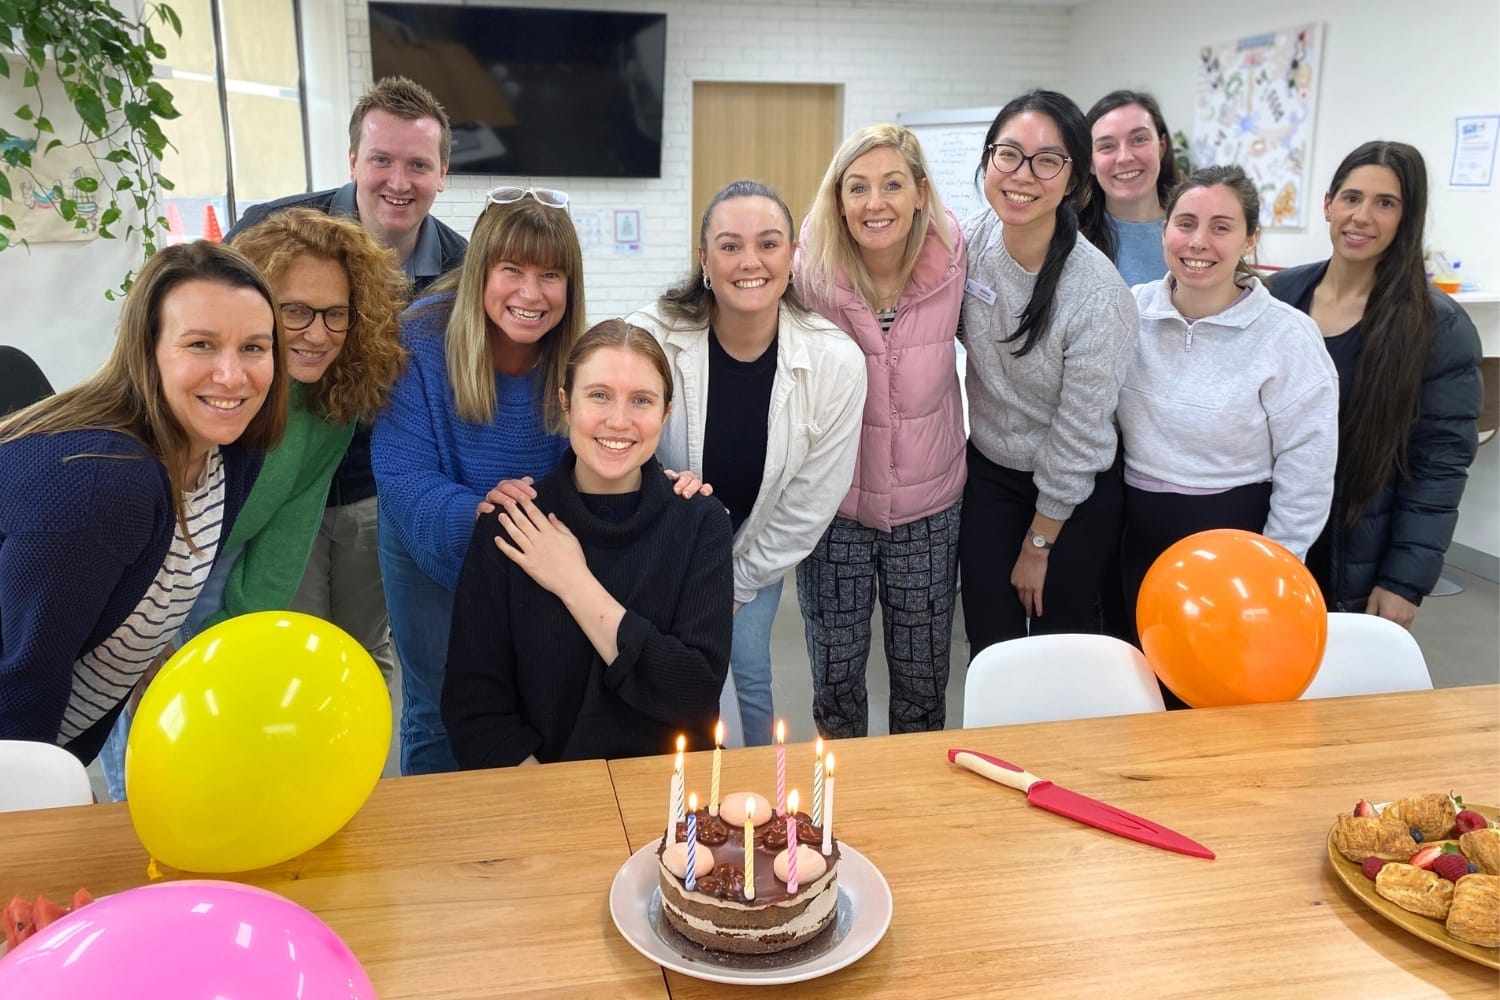 Staff celebrating Maddie's birthday in the office with balloons and cake